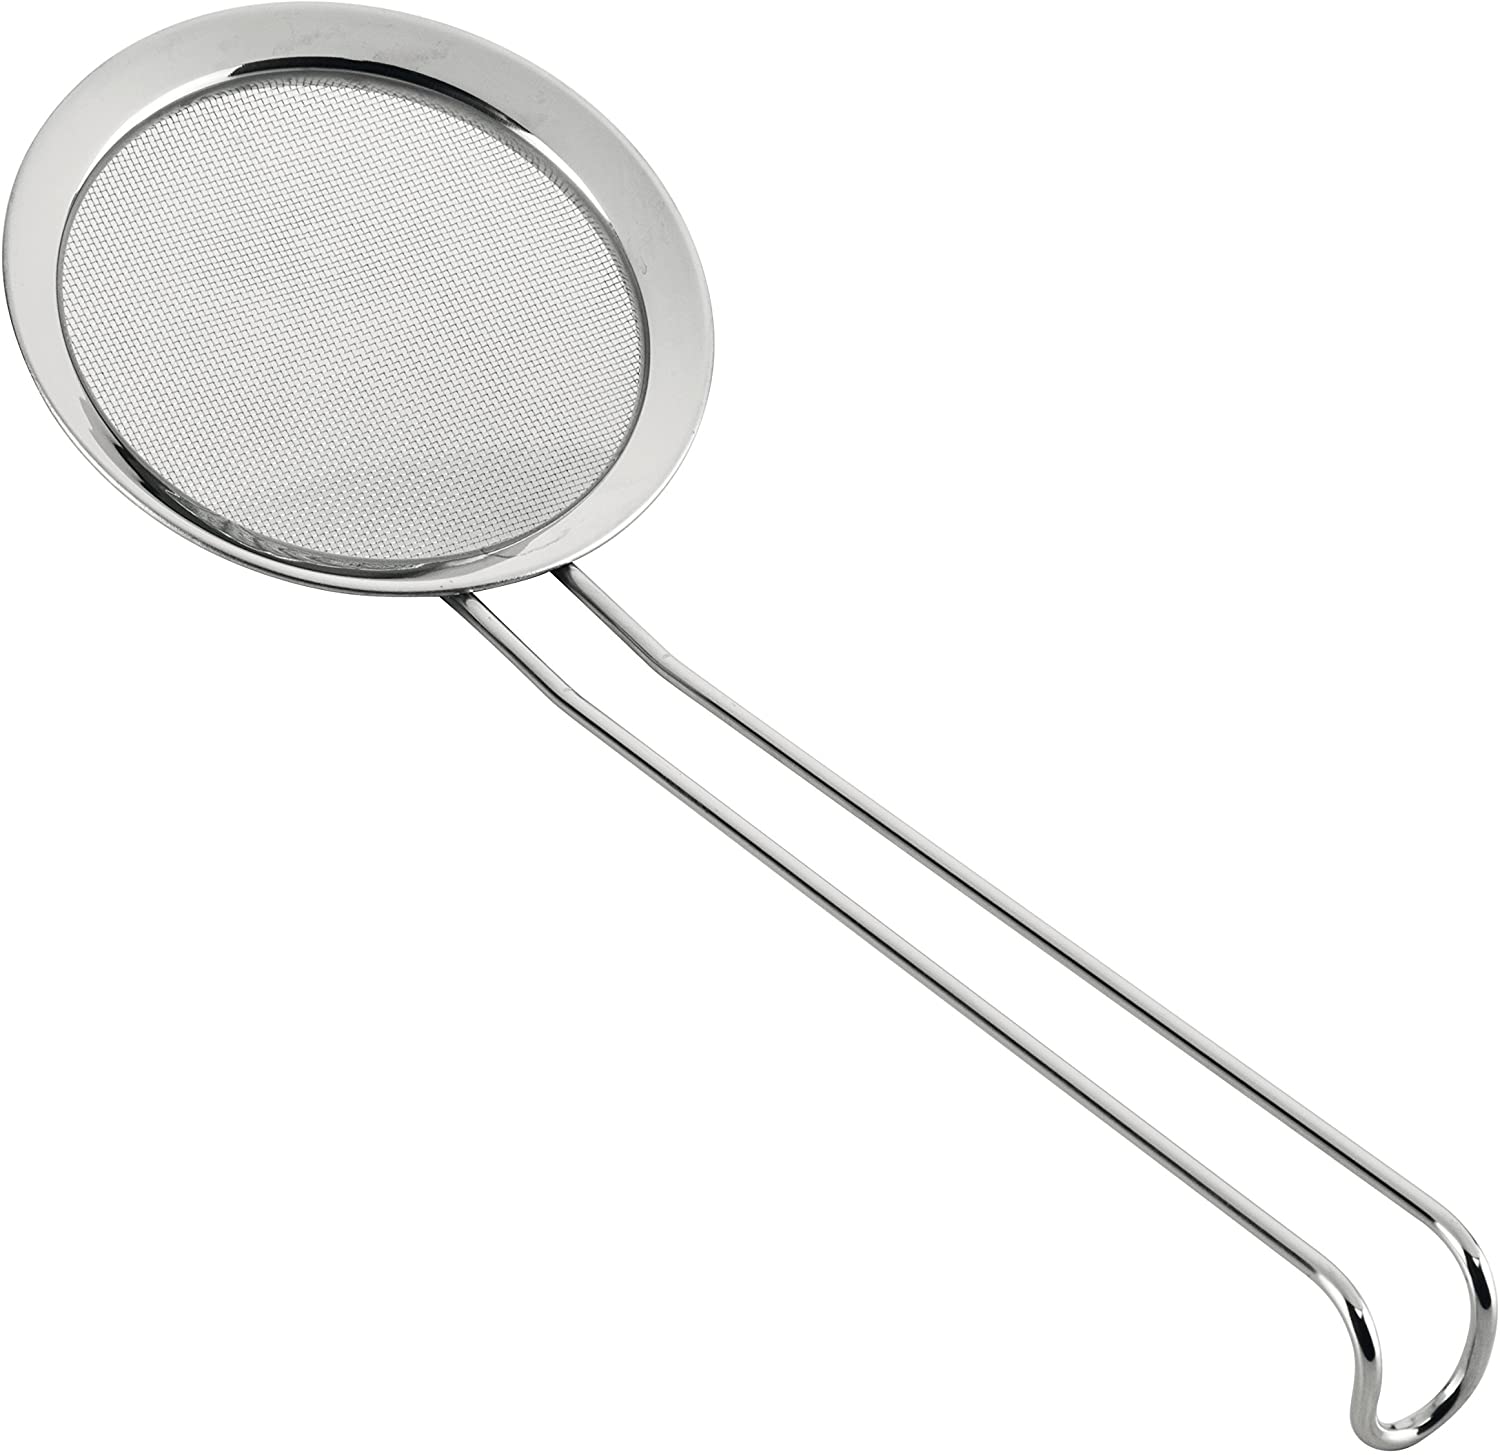 Tescoma 428420 Slotted Spoon, Stainless Steel, Grey